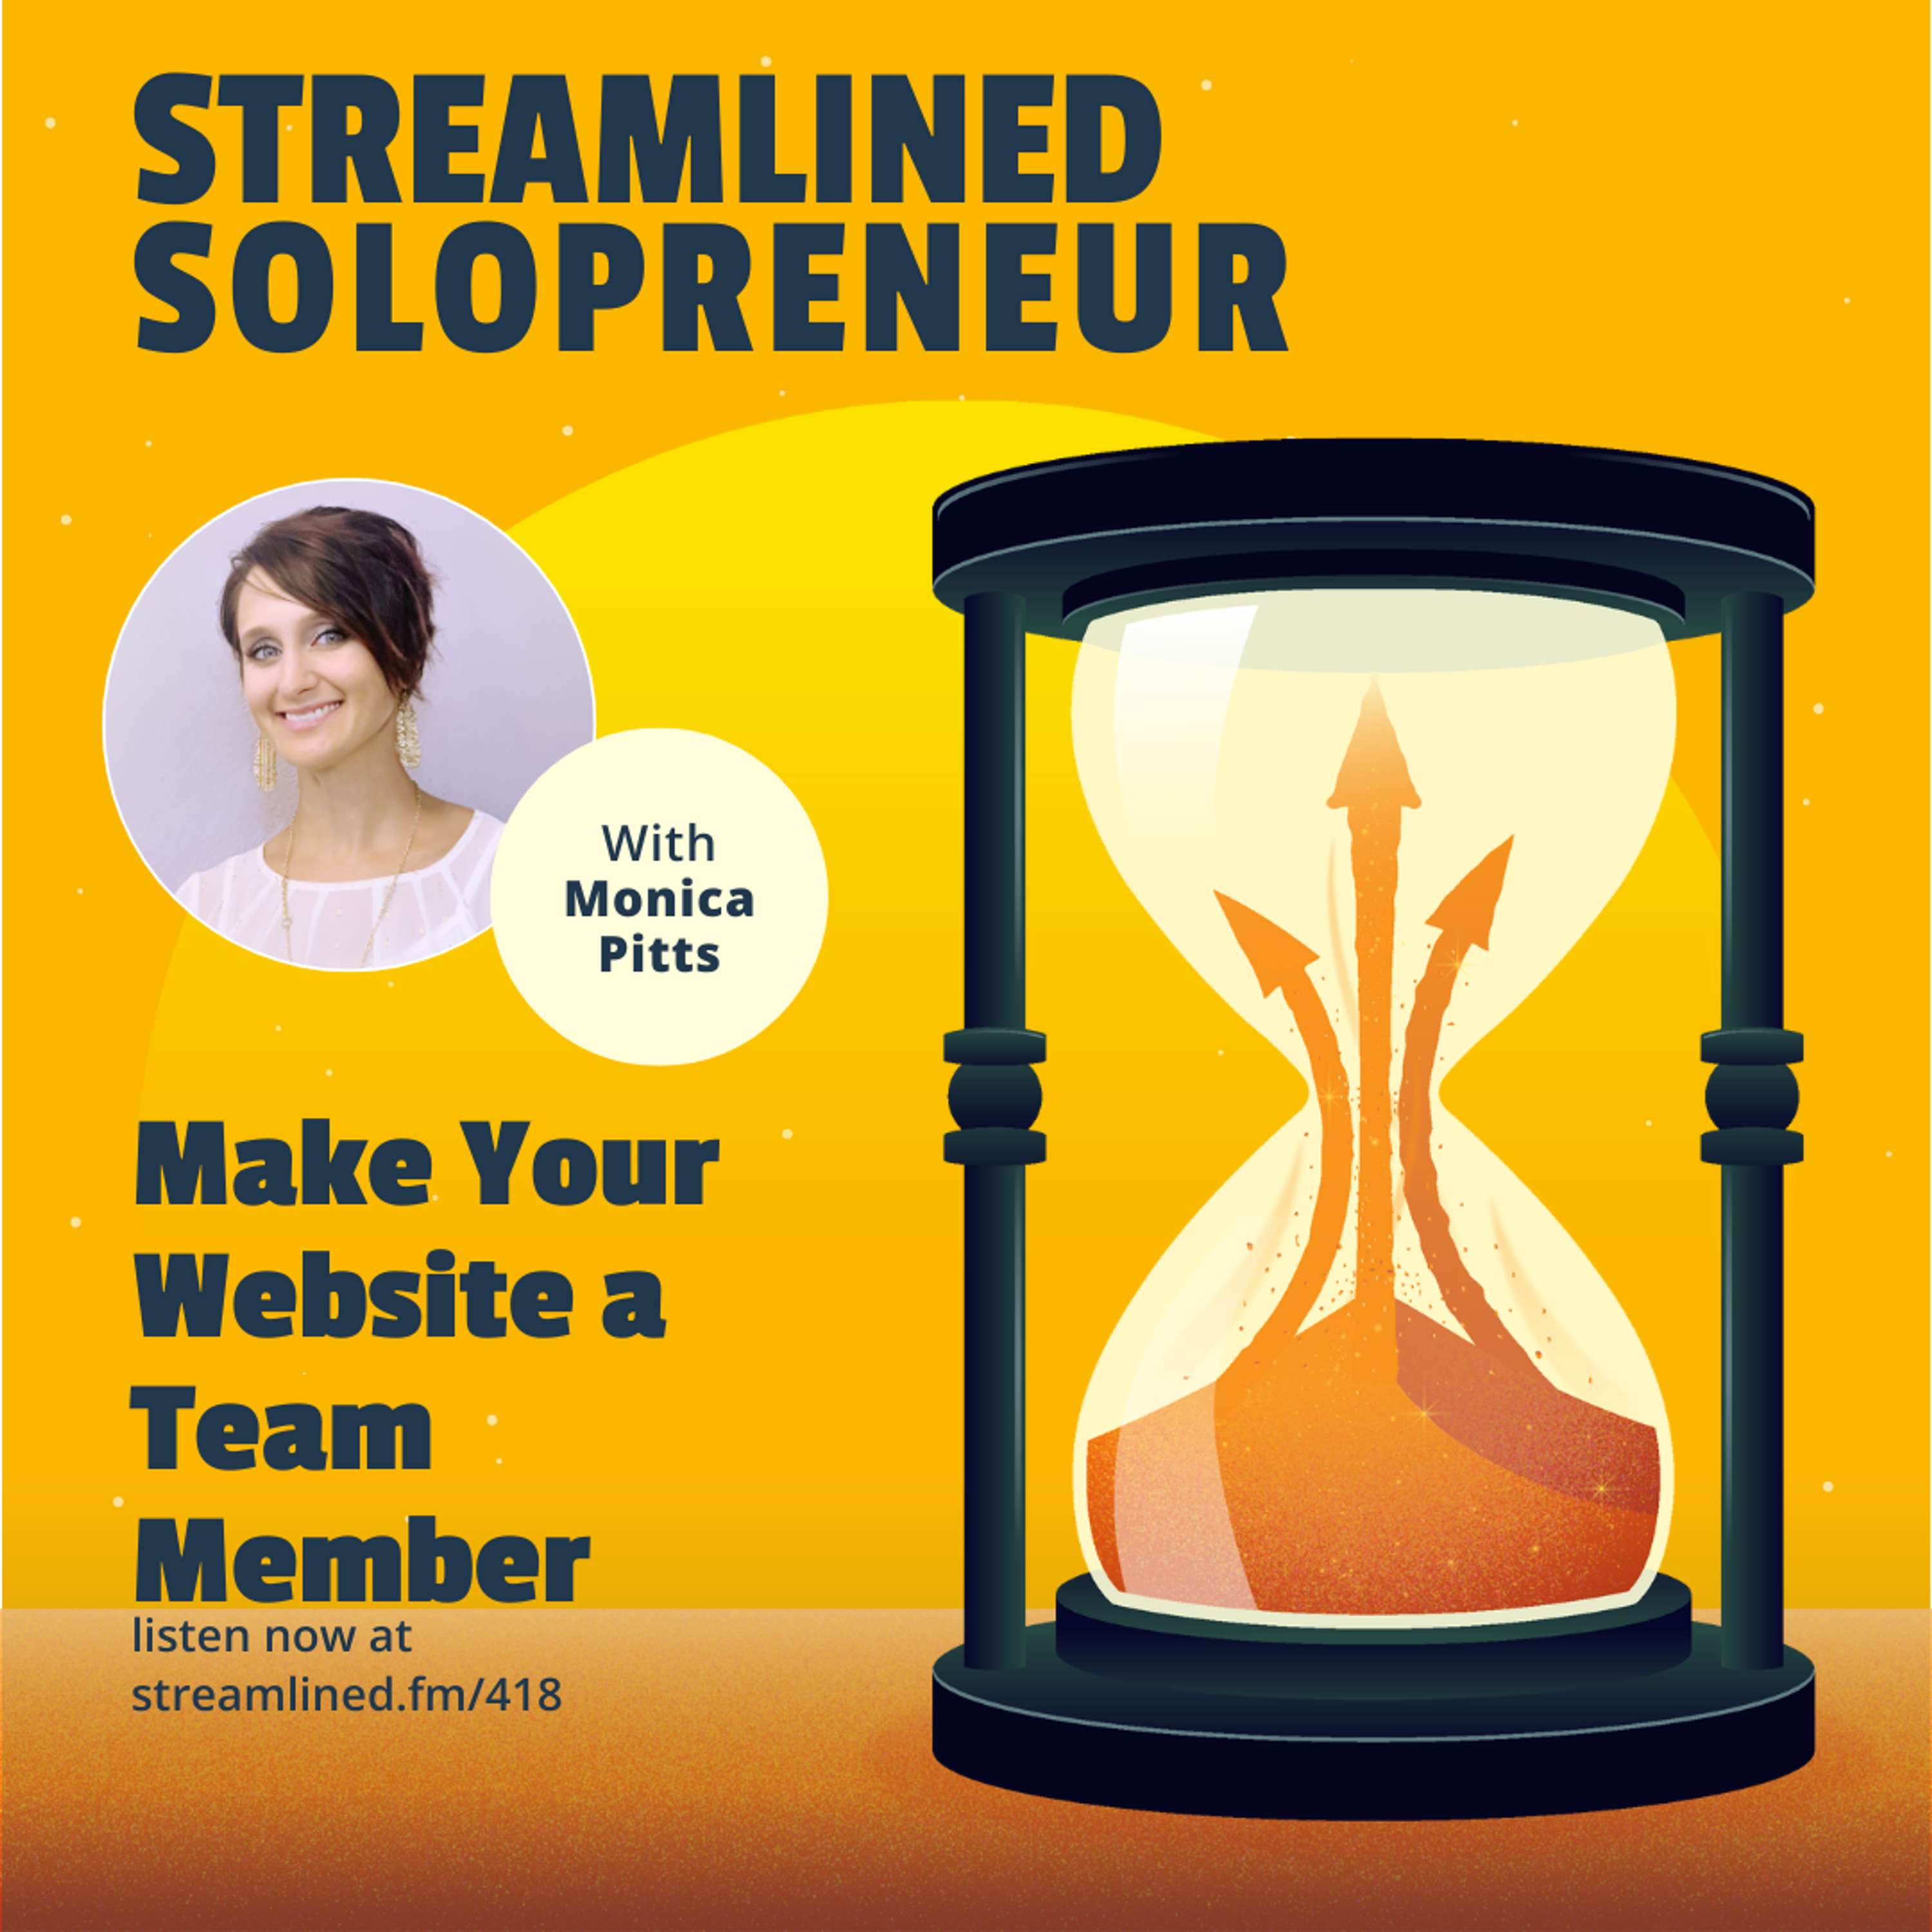 Make Your Website a Team Member with Monica Pitts